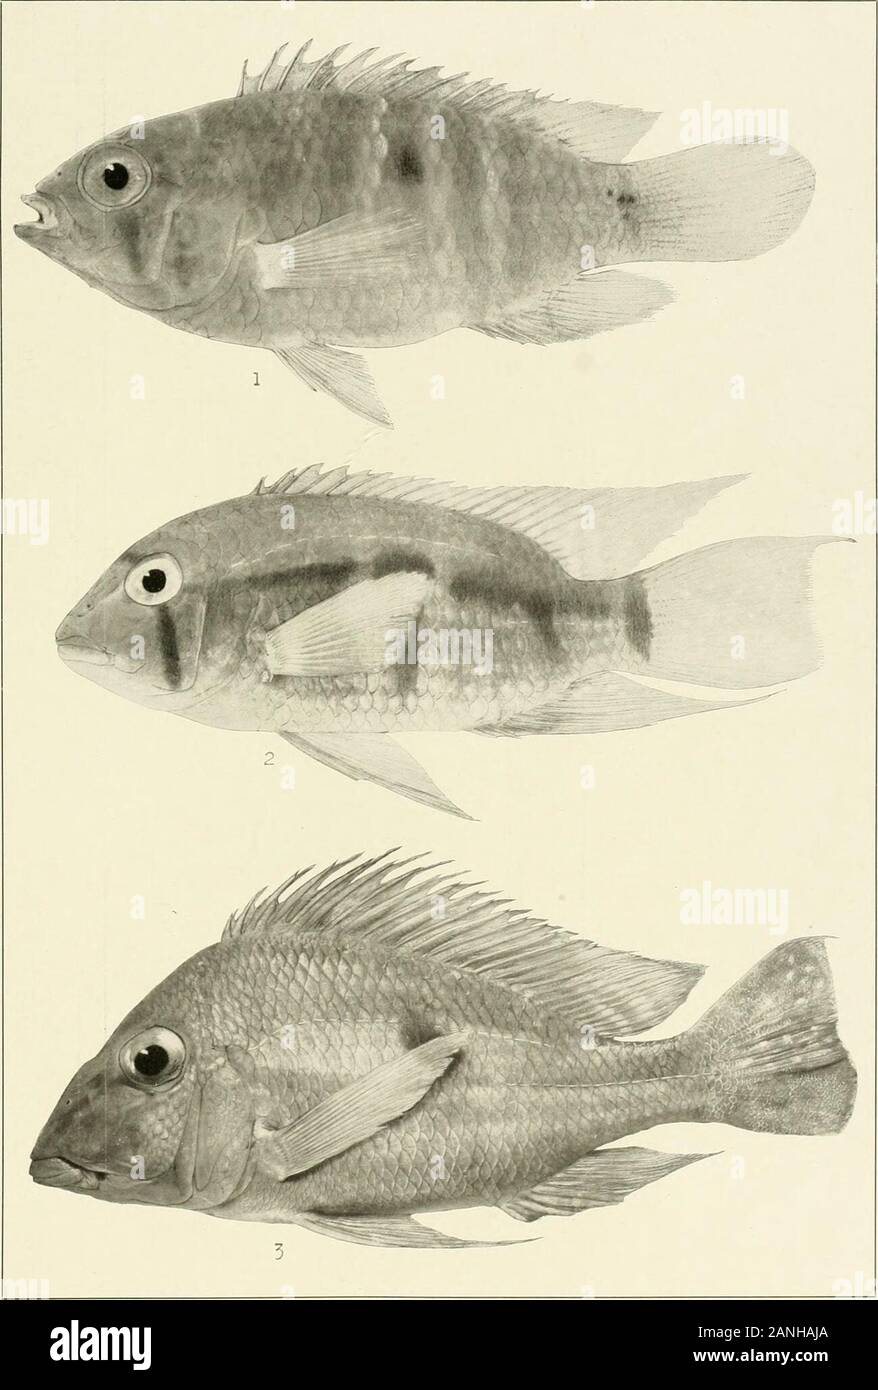 The freshwater fishes of British Guiana, including a study of the ecological grouping of species and the relation of the fauna of the plateau to that of the lowlands . 1. Acanthophacelus reticulatus (Peters), tf. 20 nun. No. 1429a. 2. Do., ?. M2 mm. No. 14296.3. Do. 39 mm. No. 1429c. 4. Acanthophacelus bifurcus Eigenmann, cf- (Cotype.) 22 mm. No. 1090a.5. Do. (Cotype), &lt;?? 21mm. No. 10906. 6. Do. (Cotype), 9 • 20 mm. No. 1089. 7. Tomeurus gracilisEigenmann, d. (Type.) 31 mm. No. 1093. 8. Do. (Cotype), y. 28 mm. No. 1094. 9. Nannacharaanomala Regan. 23 mm. No. 2303. Memoirs Carnegie Museum, Stock Photo